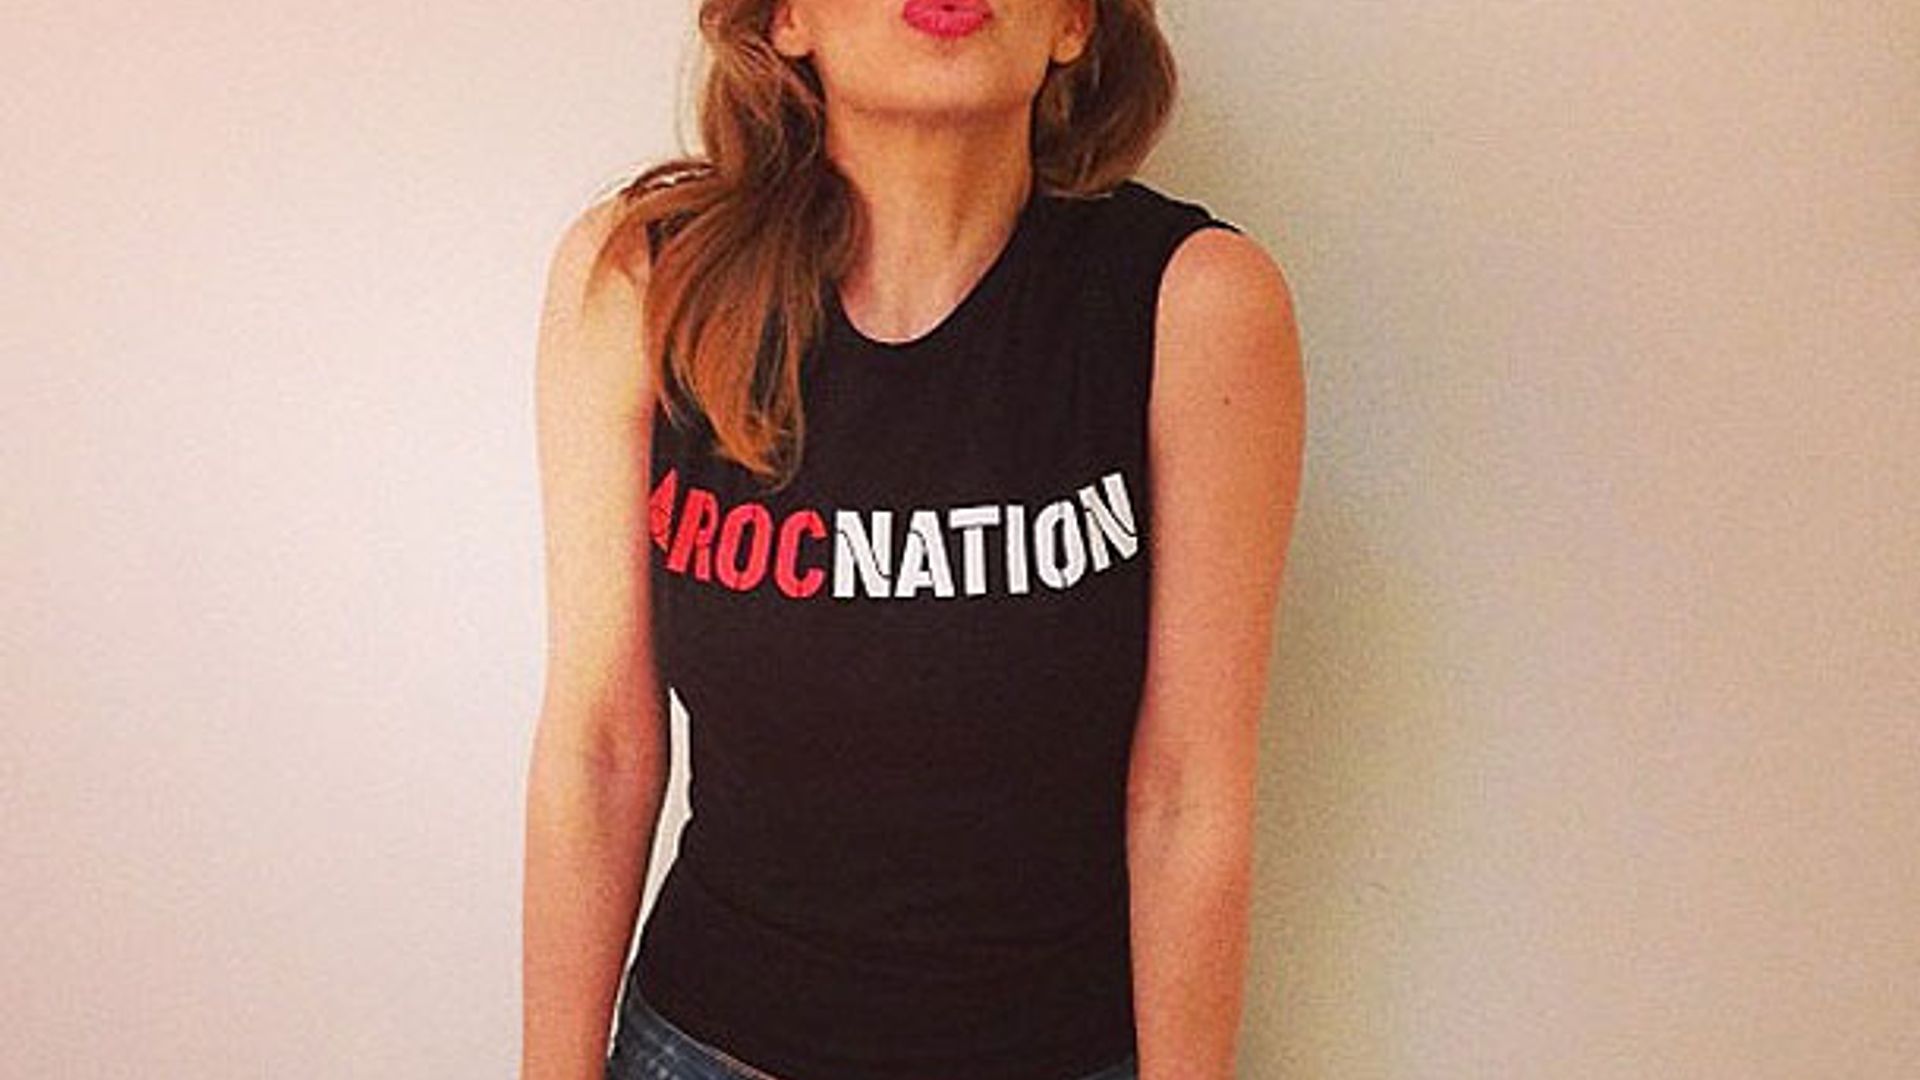 Kylie Minogue signs to Jay-Z's record label Roc Nation